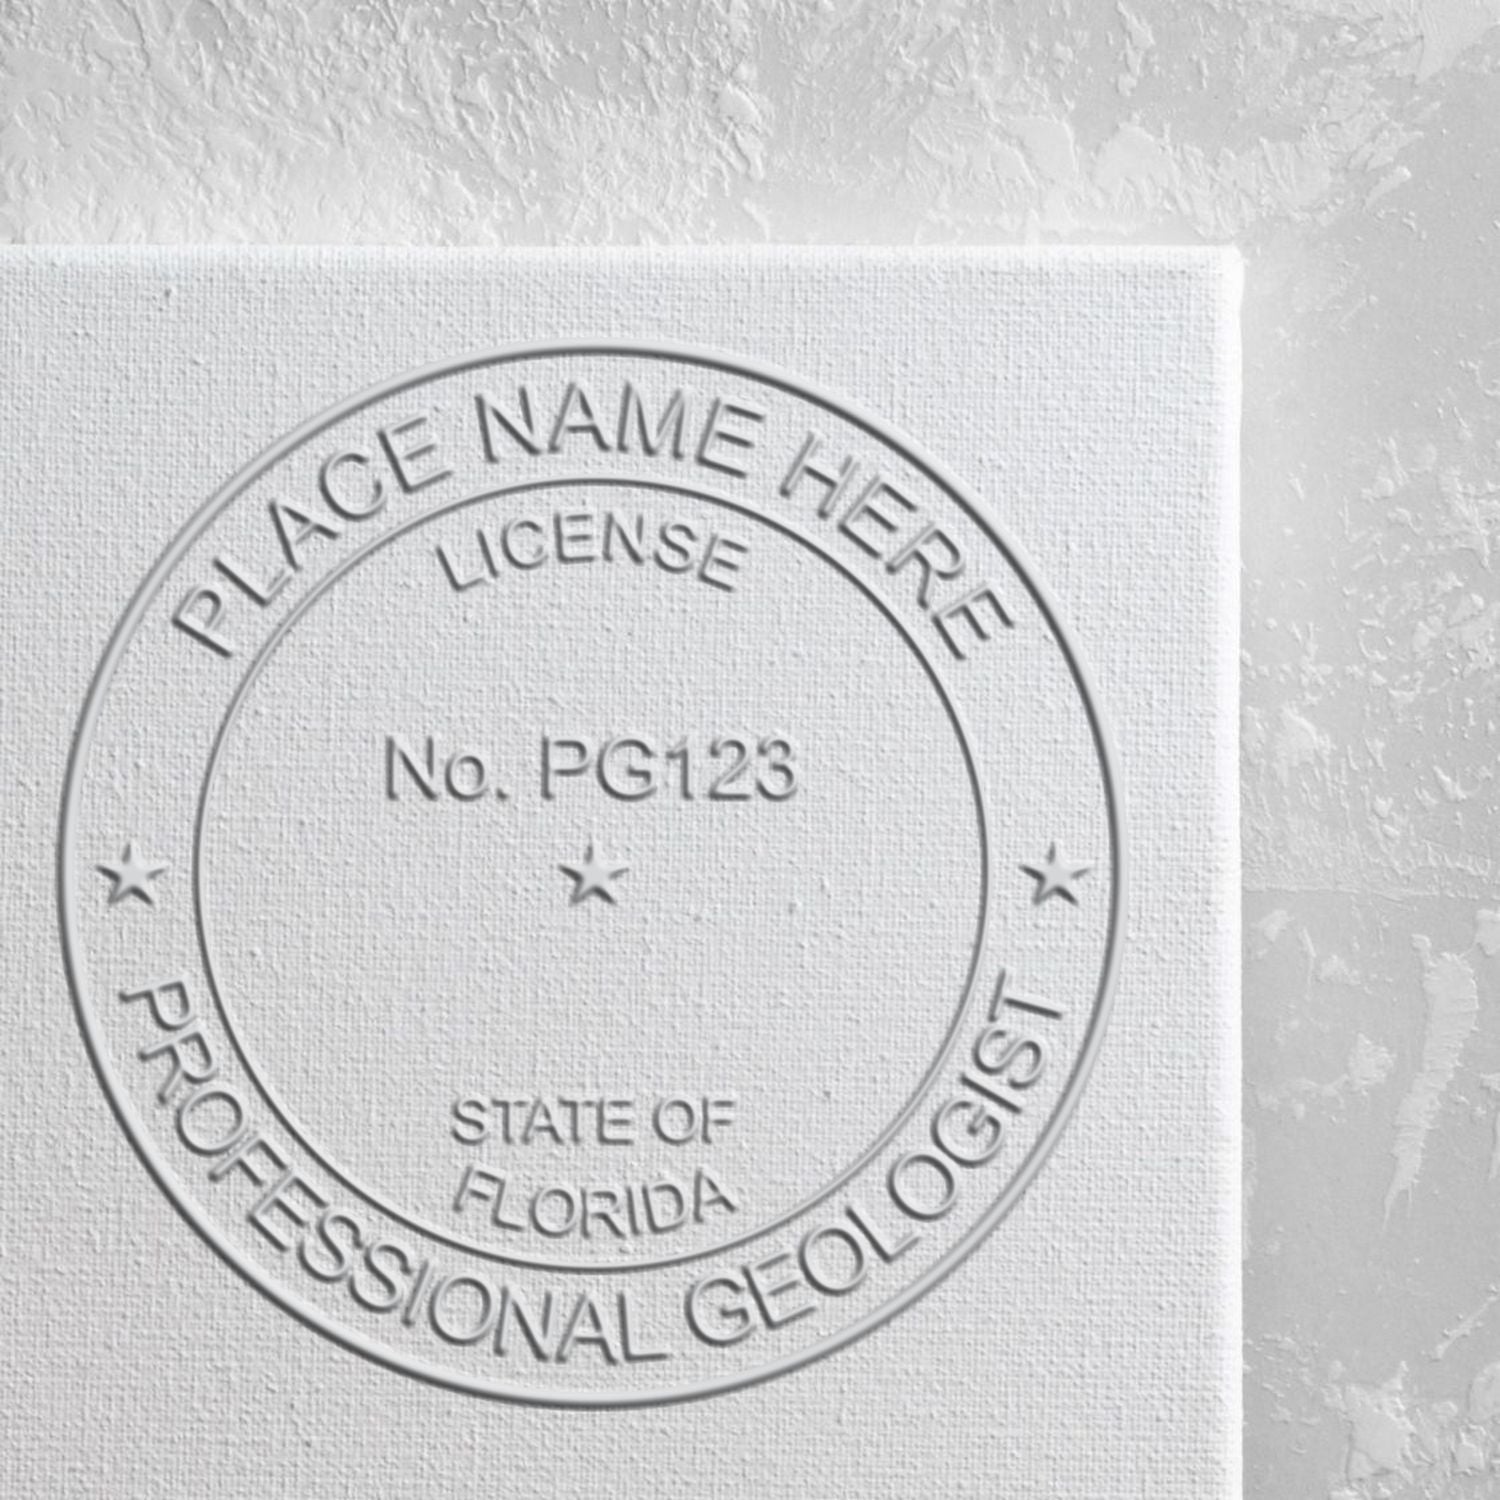 The main image for the State of Florida Extended Long Reach Geologist Seal depicting a sample of the imprint and imprint sample